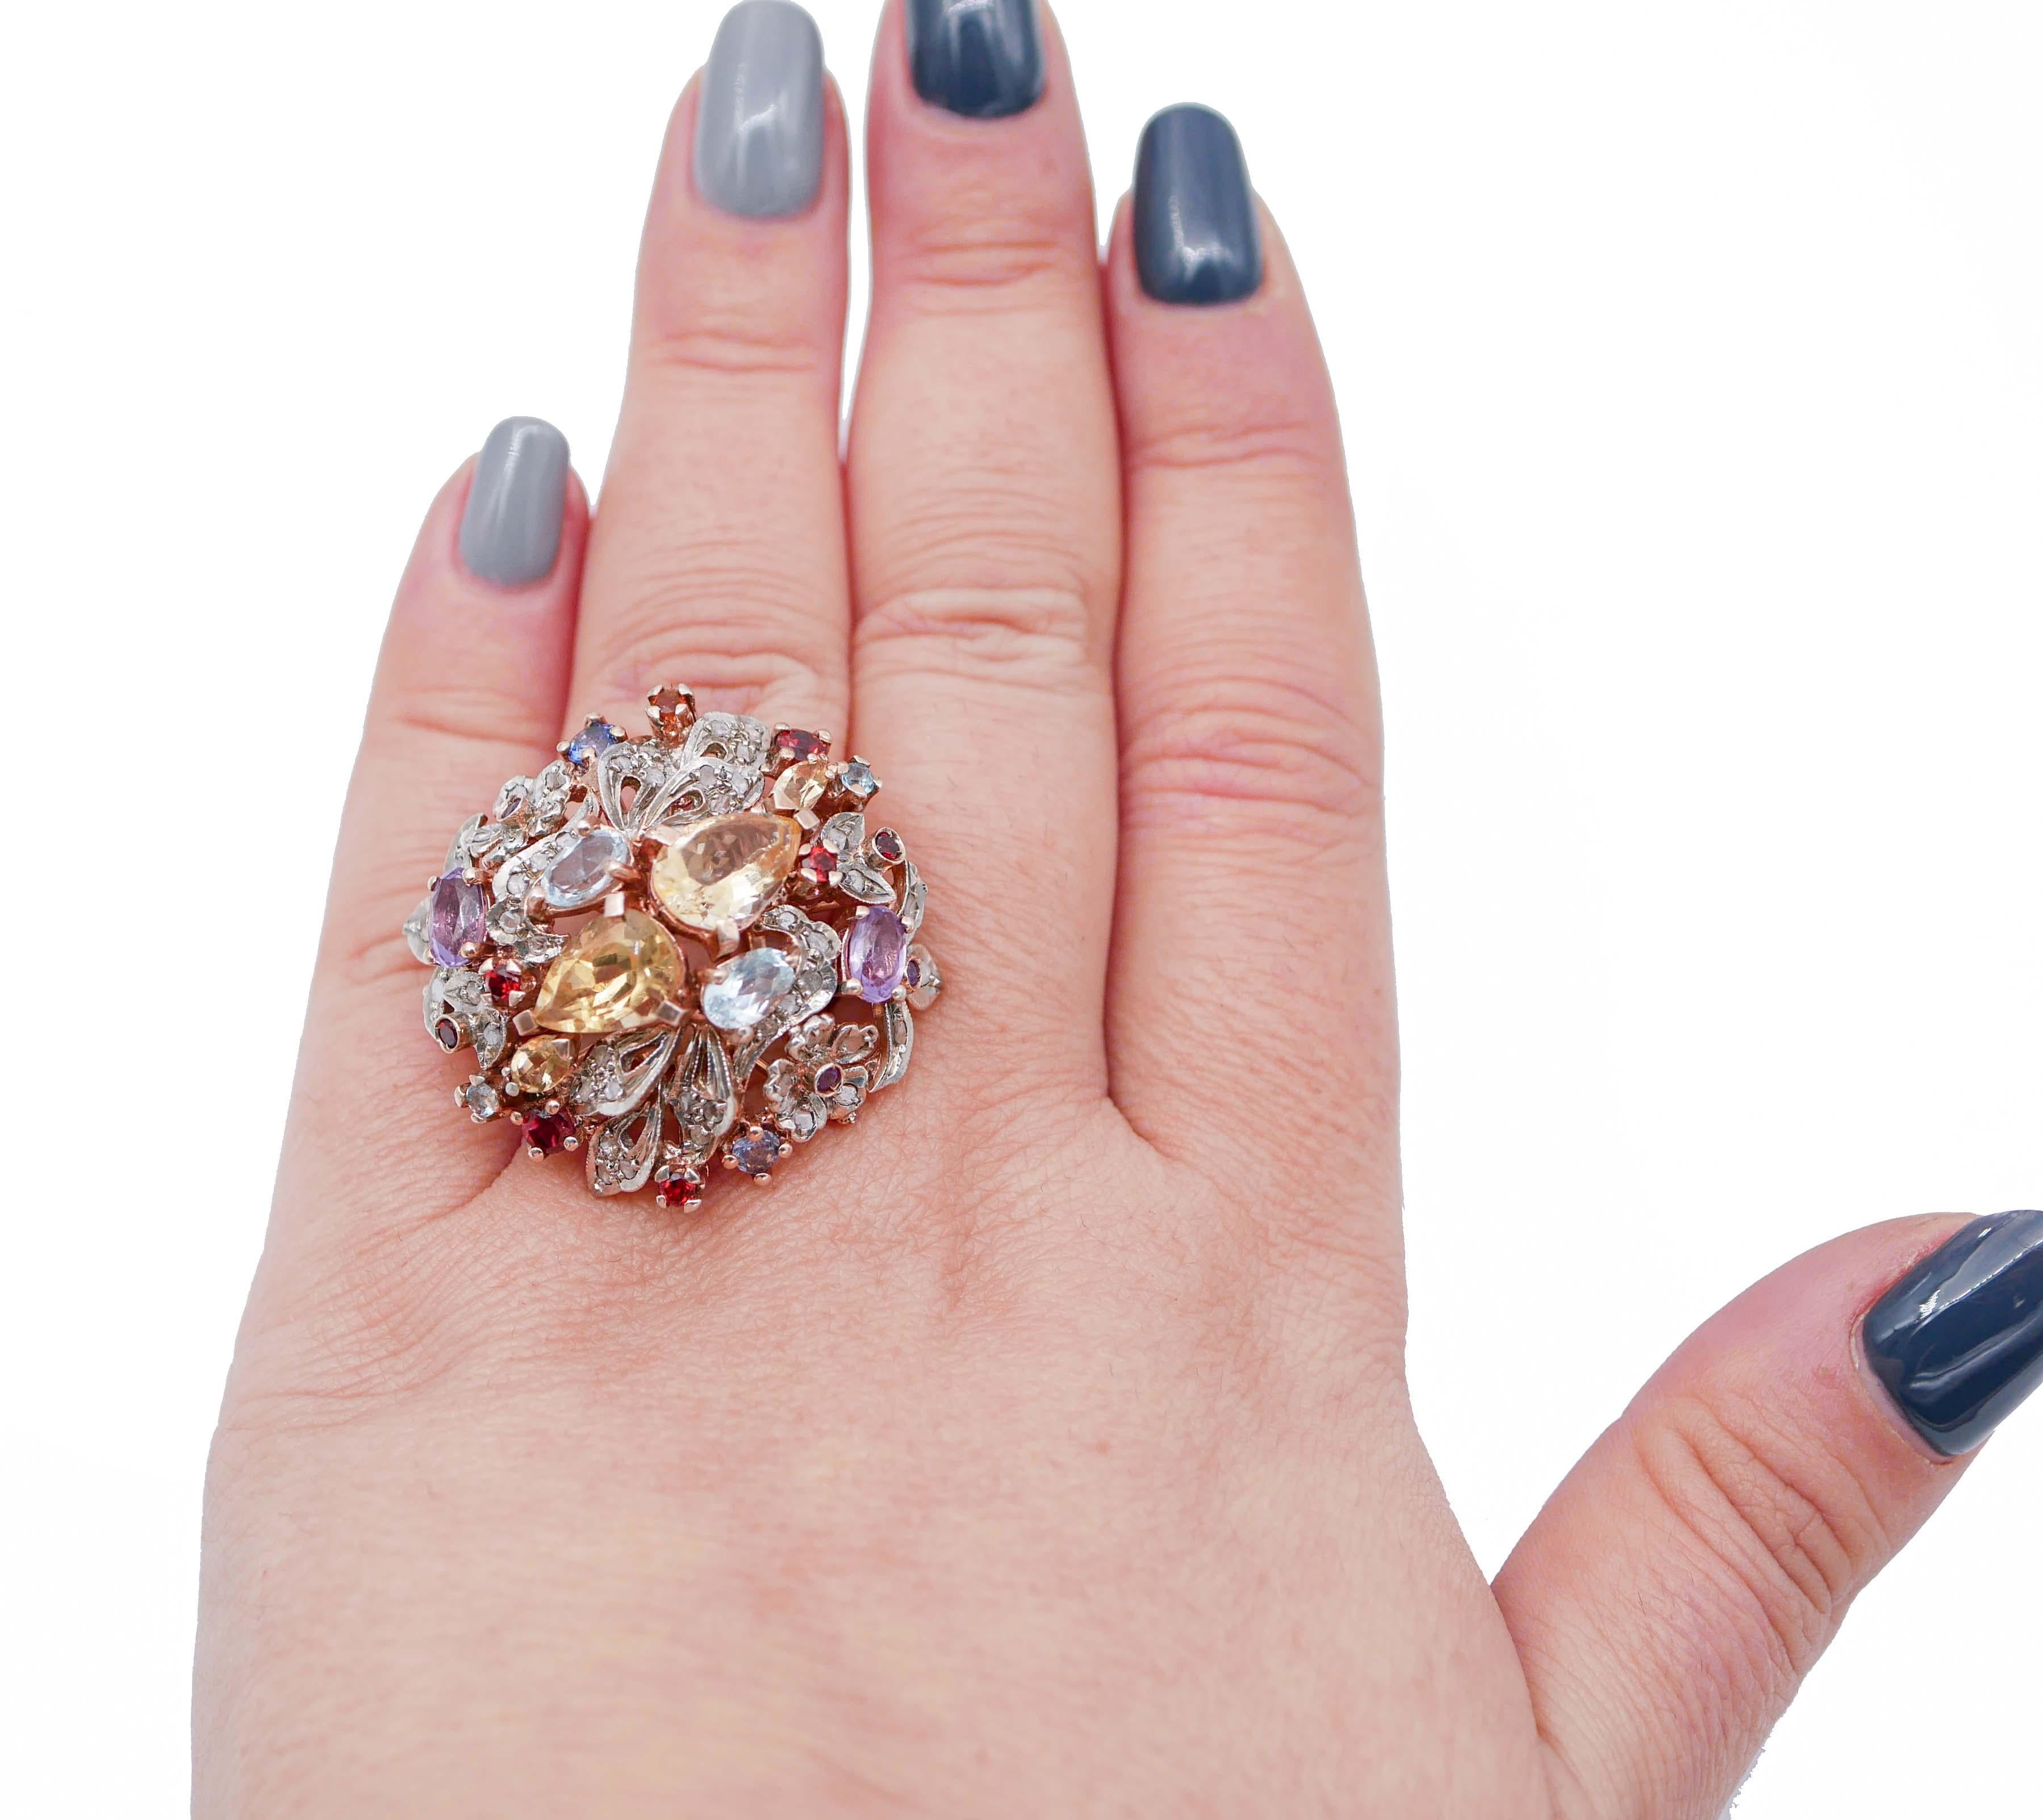 Mixed Cut Topazs, Amethysts, Garnets, Diamonds, 14 Karat Rose Gold and Silver Ring For Sale